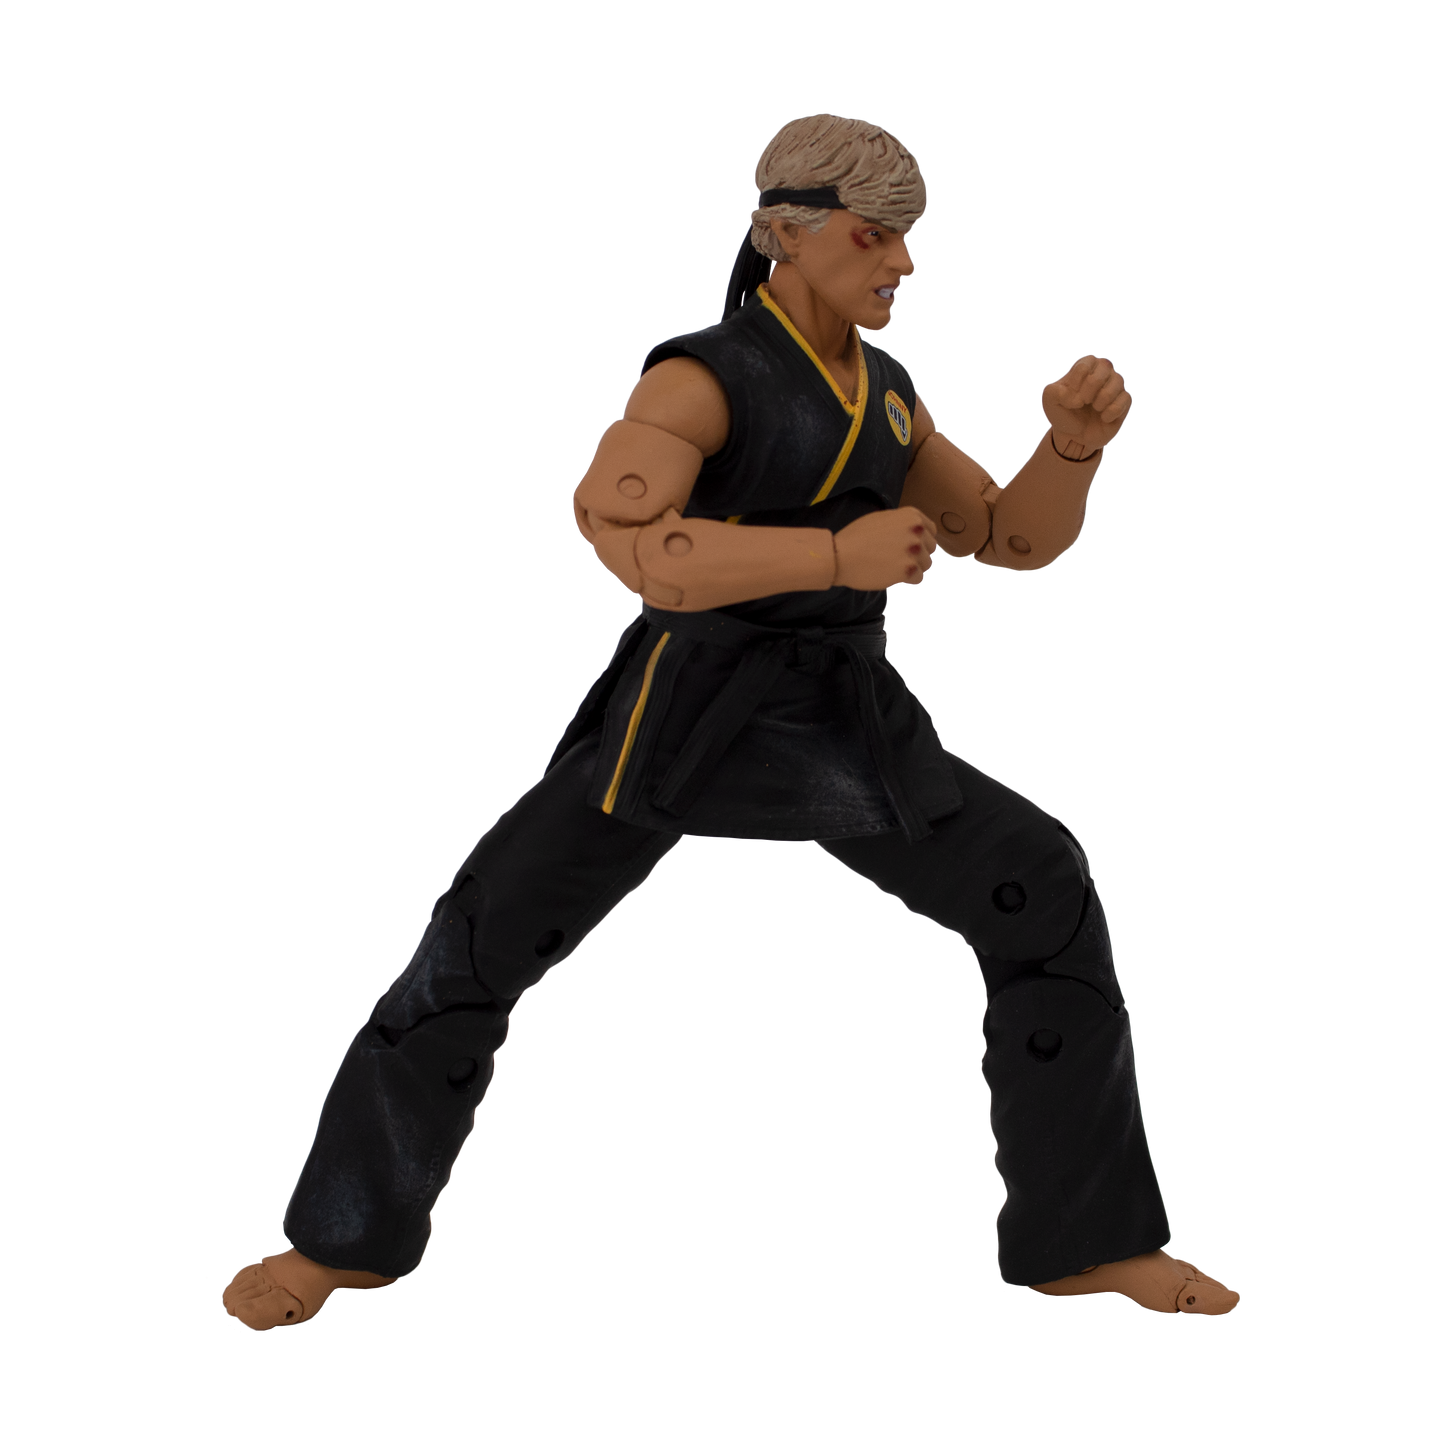 The Karate Kid Battle Damaged Johnny Lawrence Action Figure - Books A Million Exclusive - Icon Heroes 